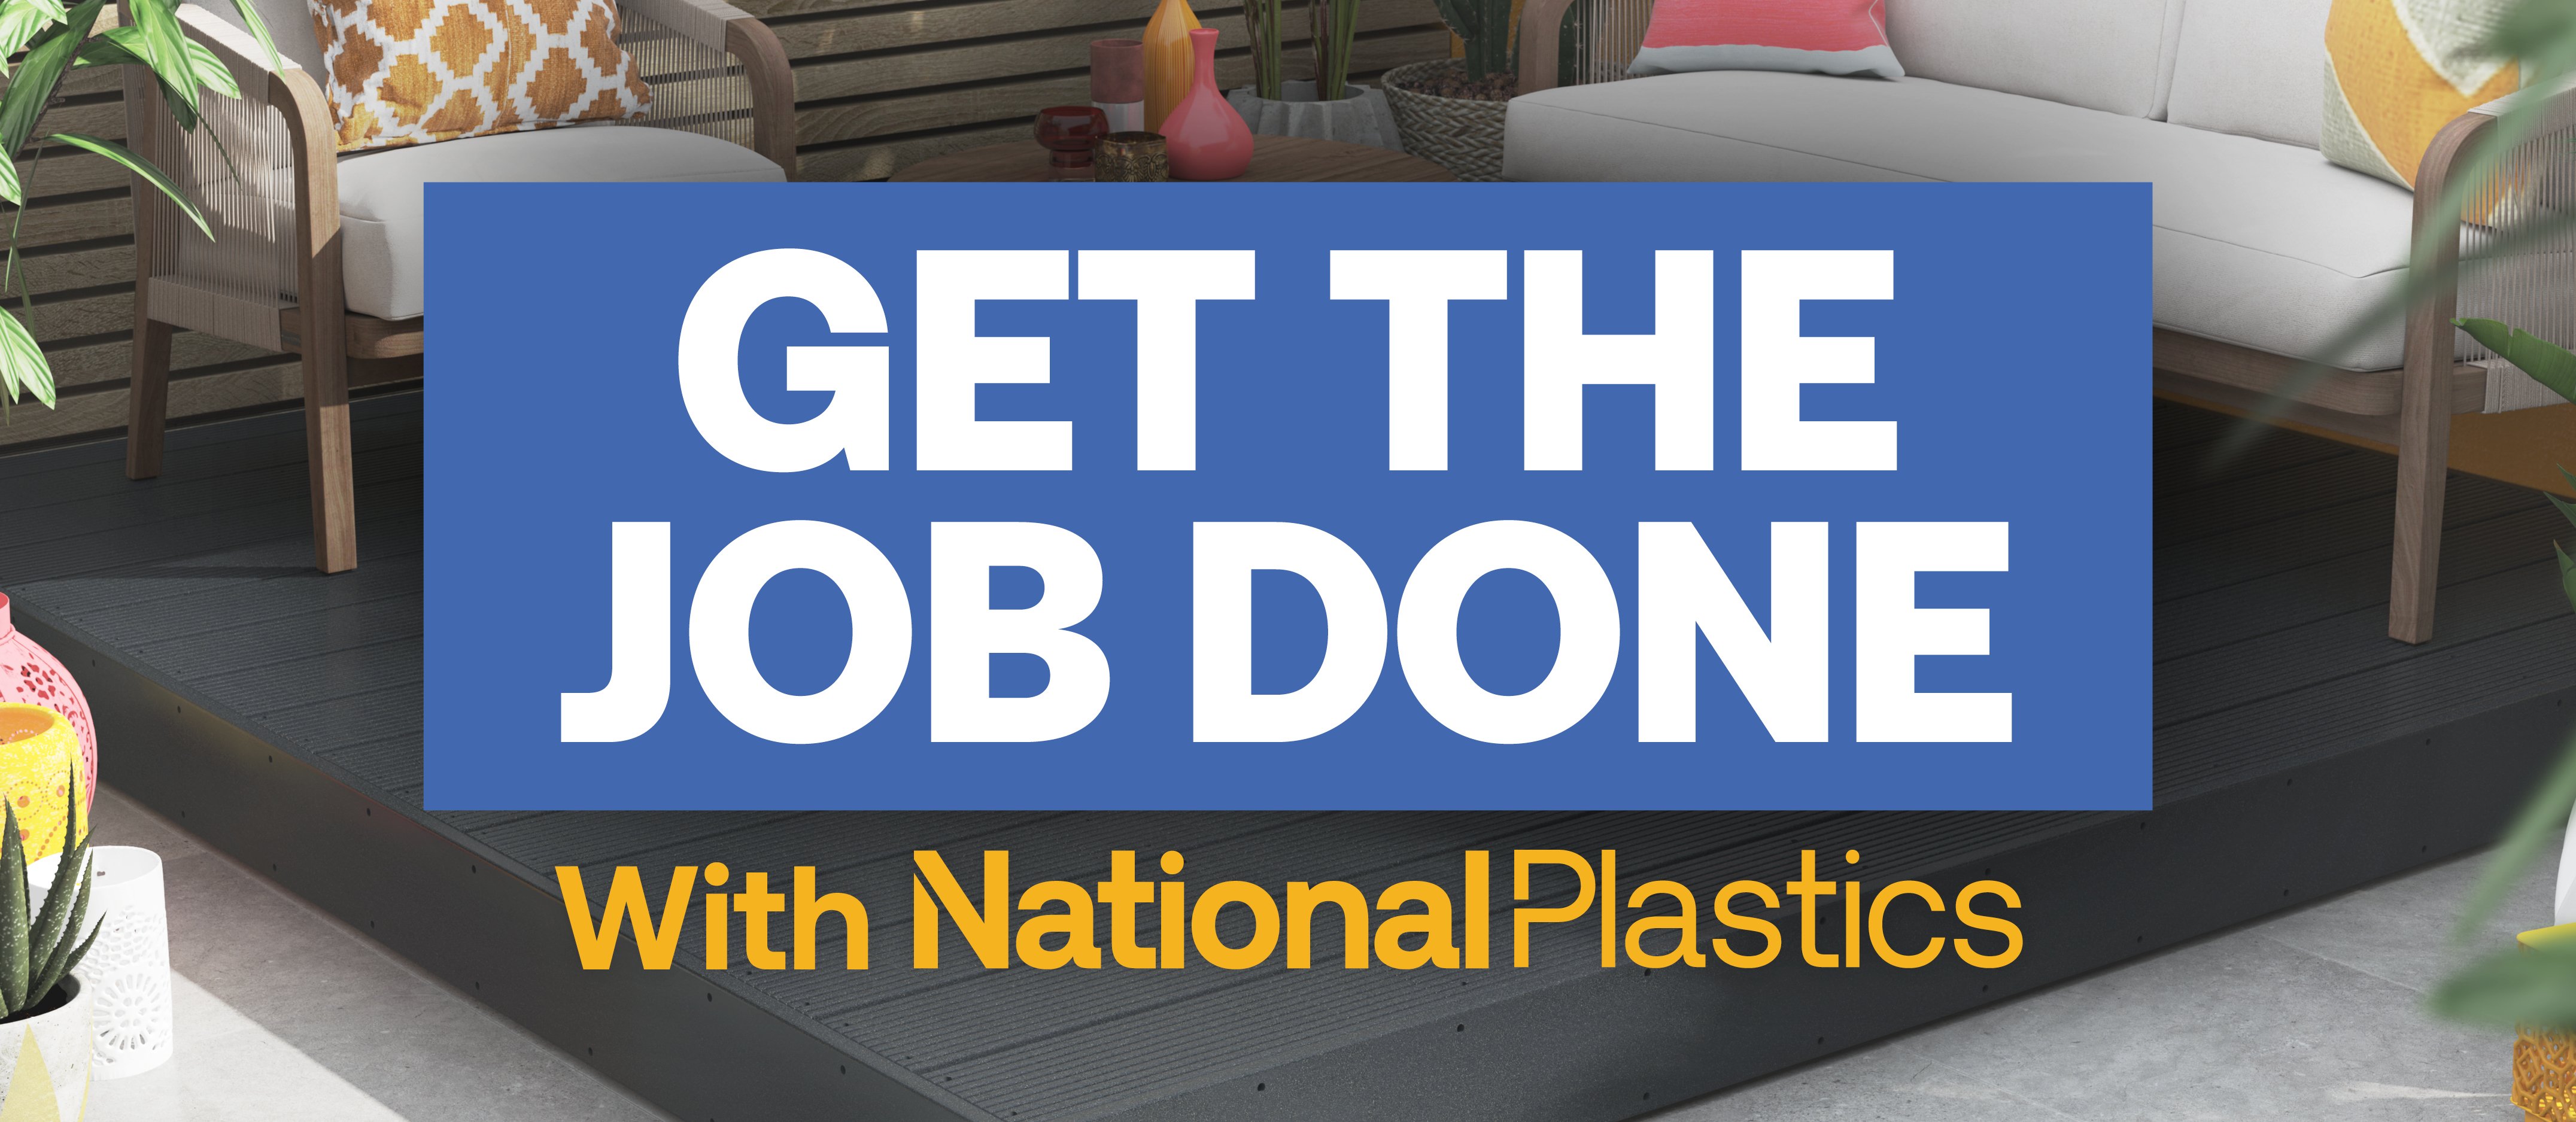 Get the Job Done With National Plastics 